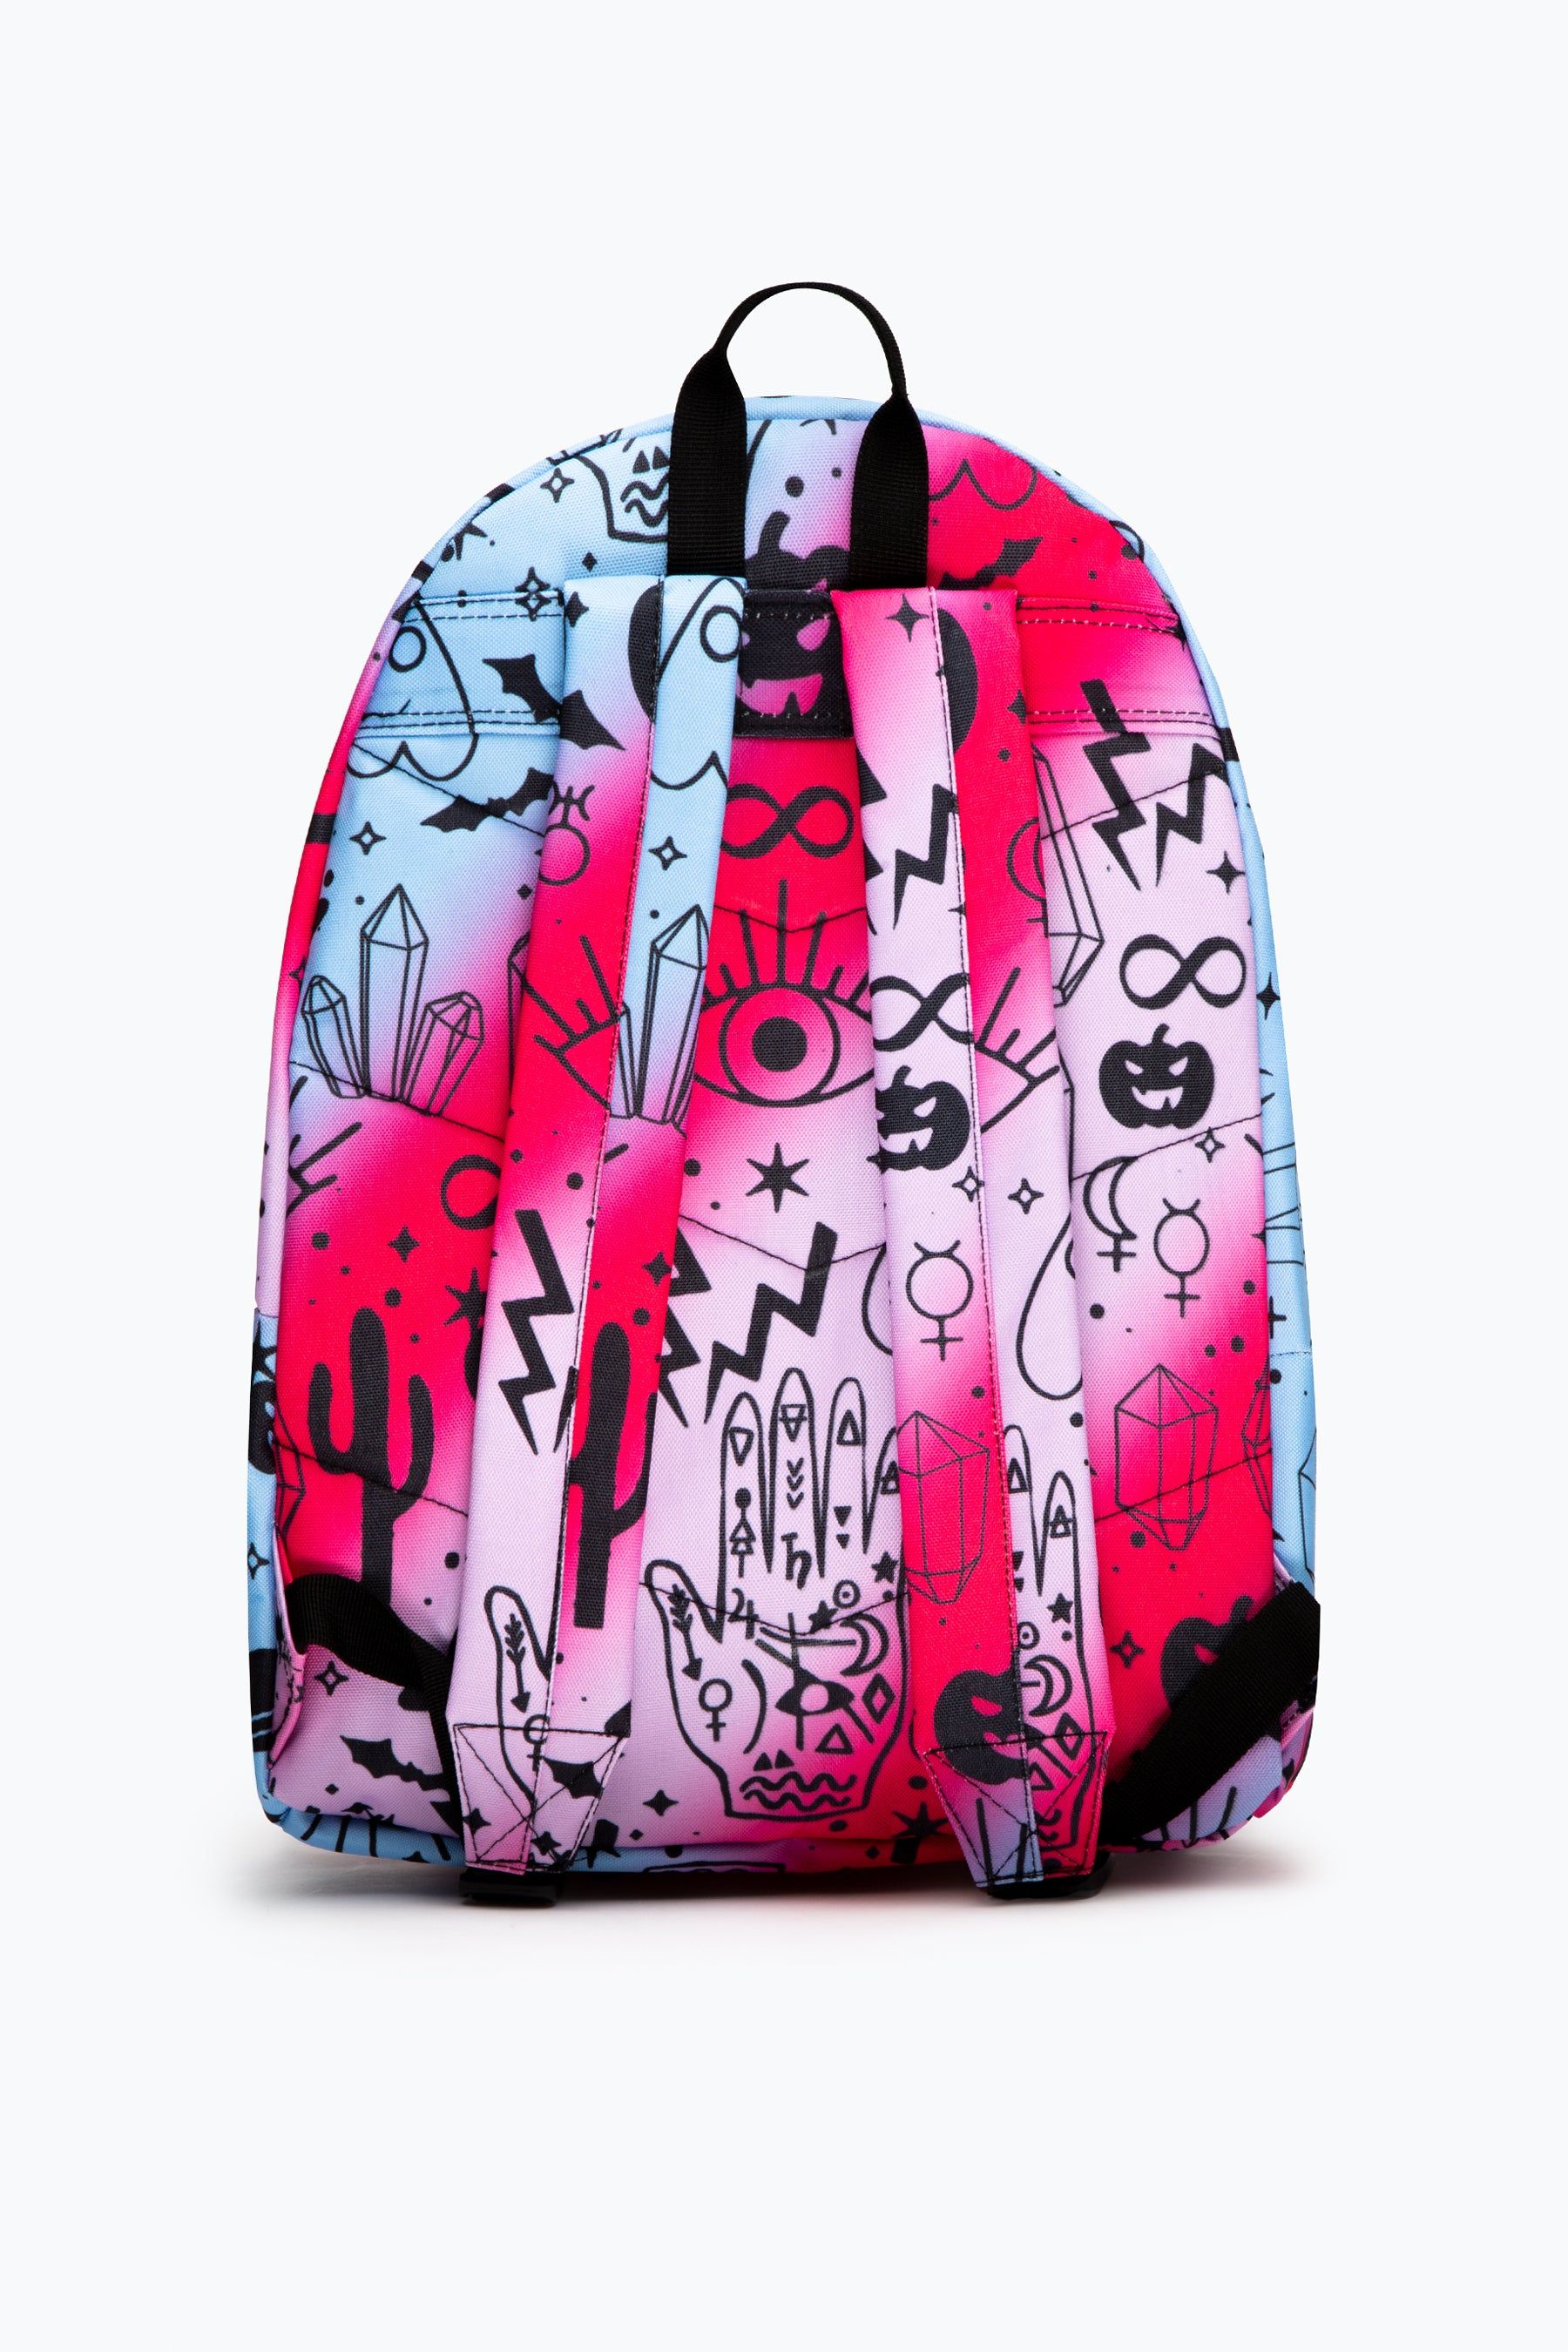 The HYPE. multi fade mystic doodle backpack is our interpretation of our dream sky. Designed with an allover gradient background finished with mystic illustrations. This is the perfect backpack to showcase your fun personality. Measuring at 42cms x 30cms x 12cms, this is the perfect size to transport your goods from A to B. The straps offer supreme comfort with just the right amount of padding. Wipe clean only.